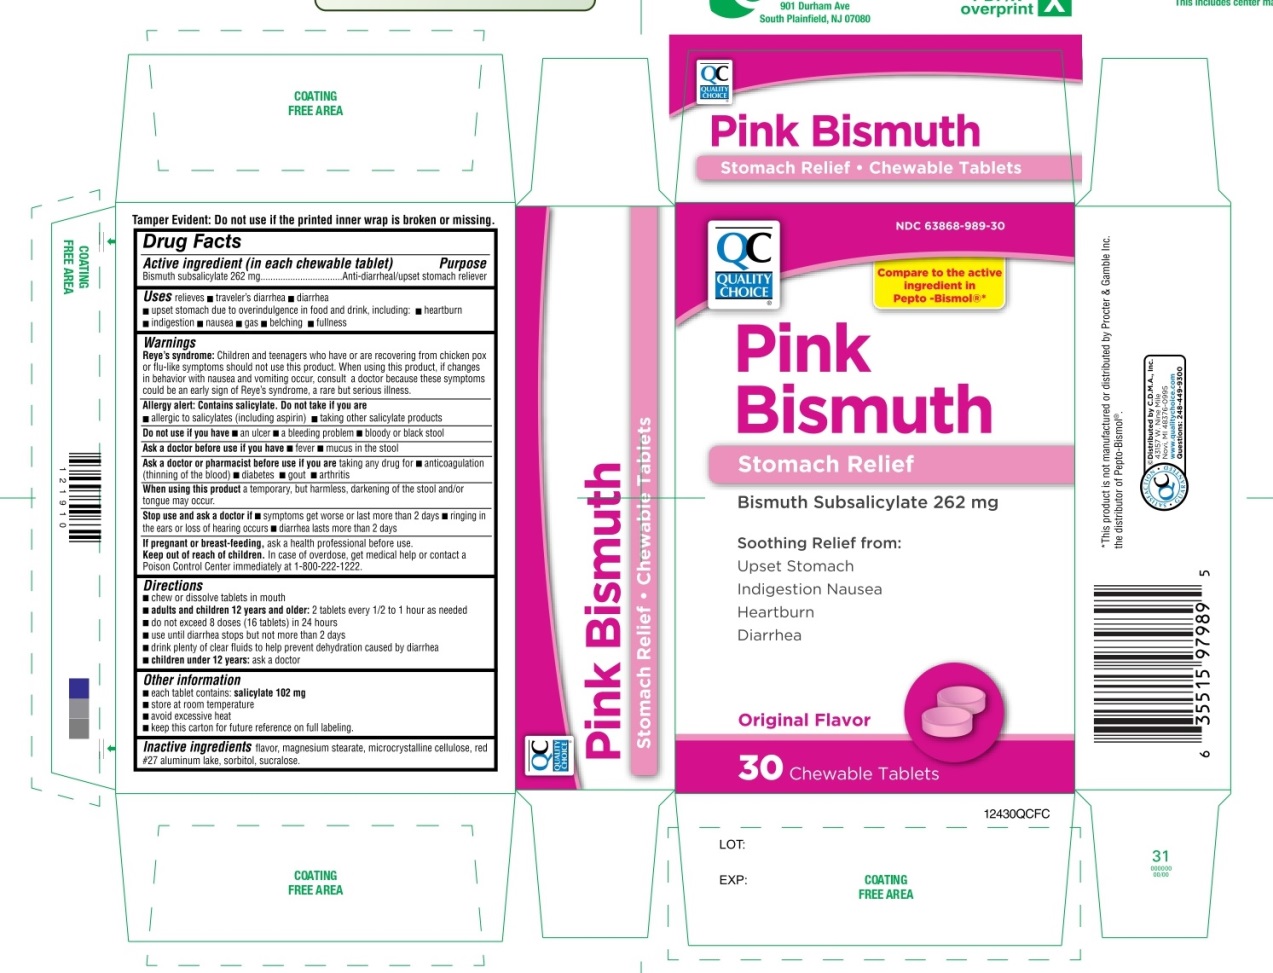 Quality Choice Pink Bismuth 30 Chewable Tablets